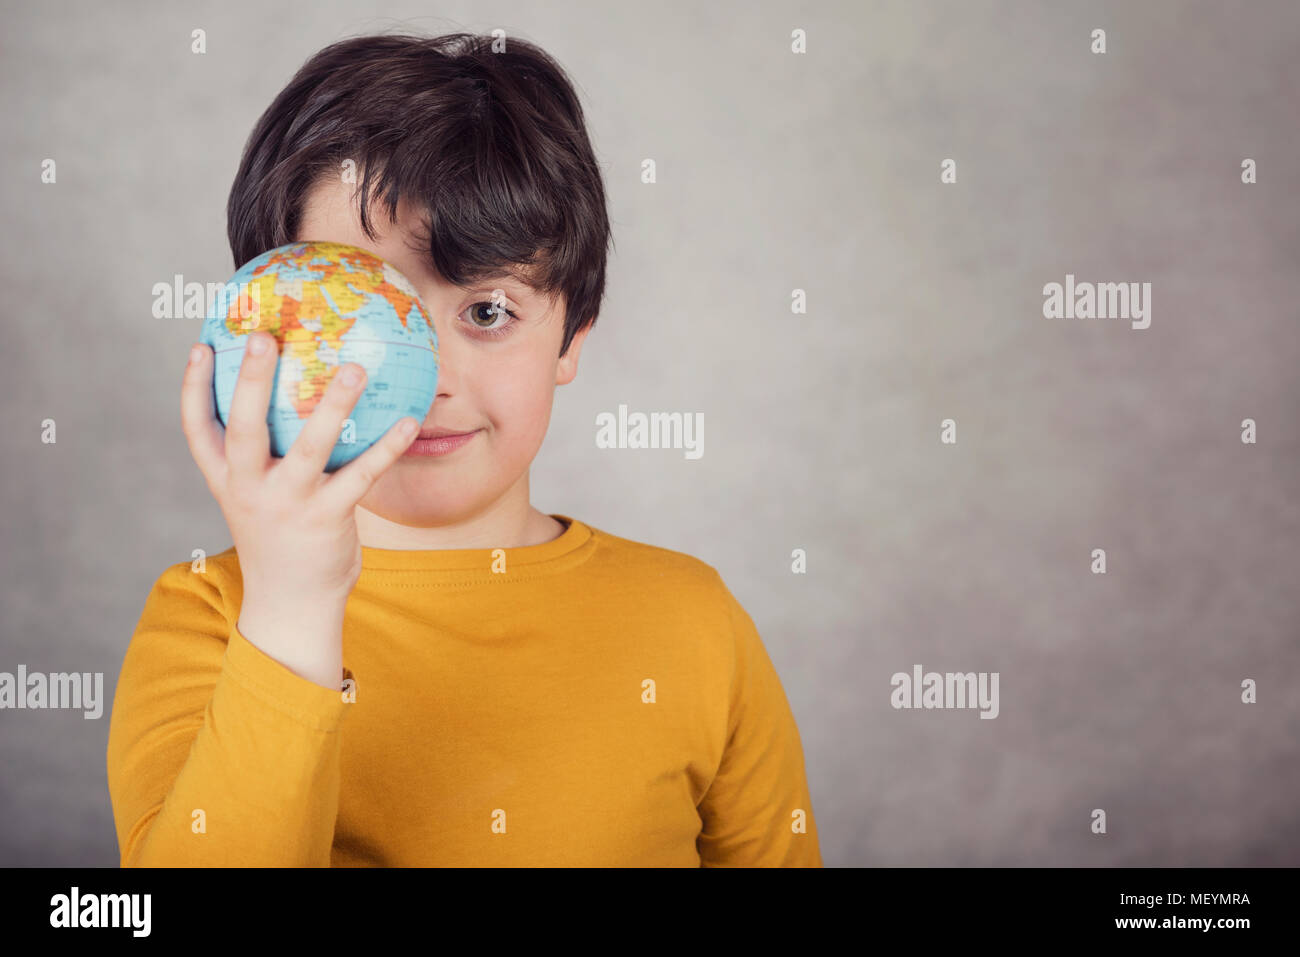 smiling boy with a earth globe covering his eye Stock Photo